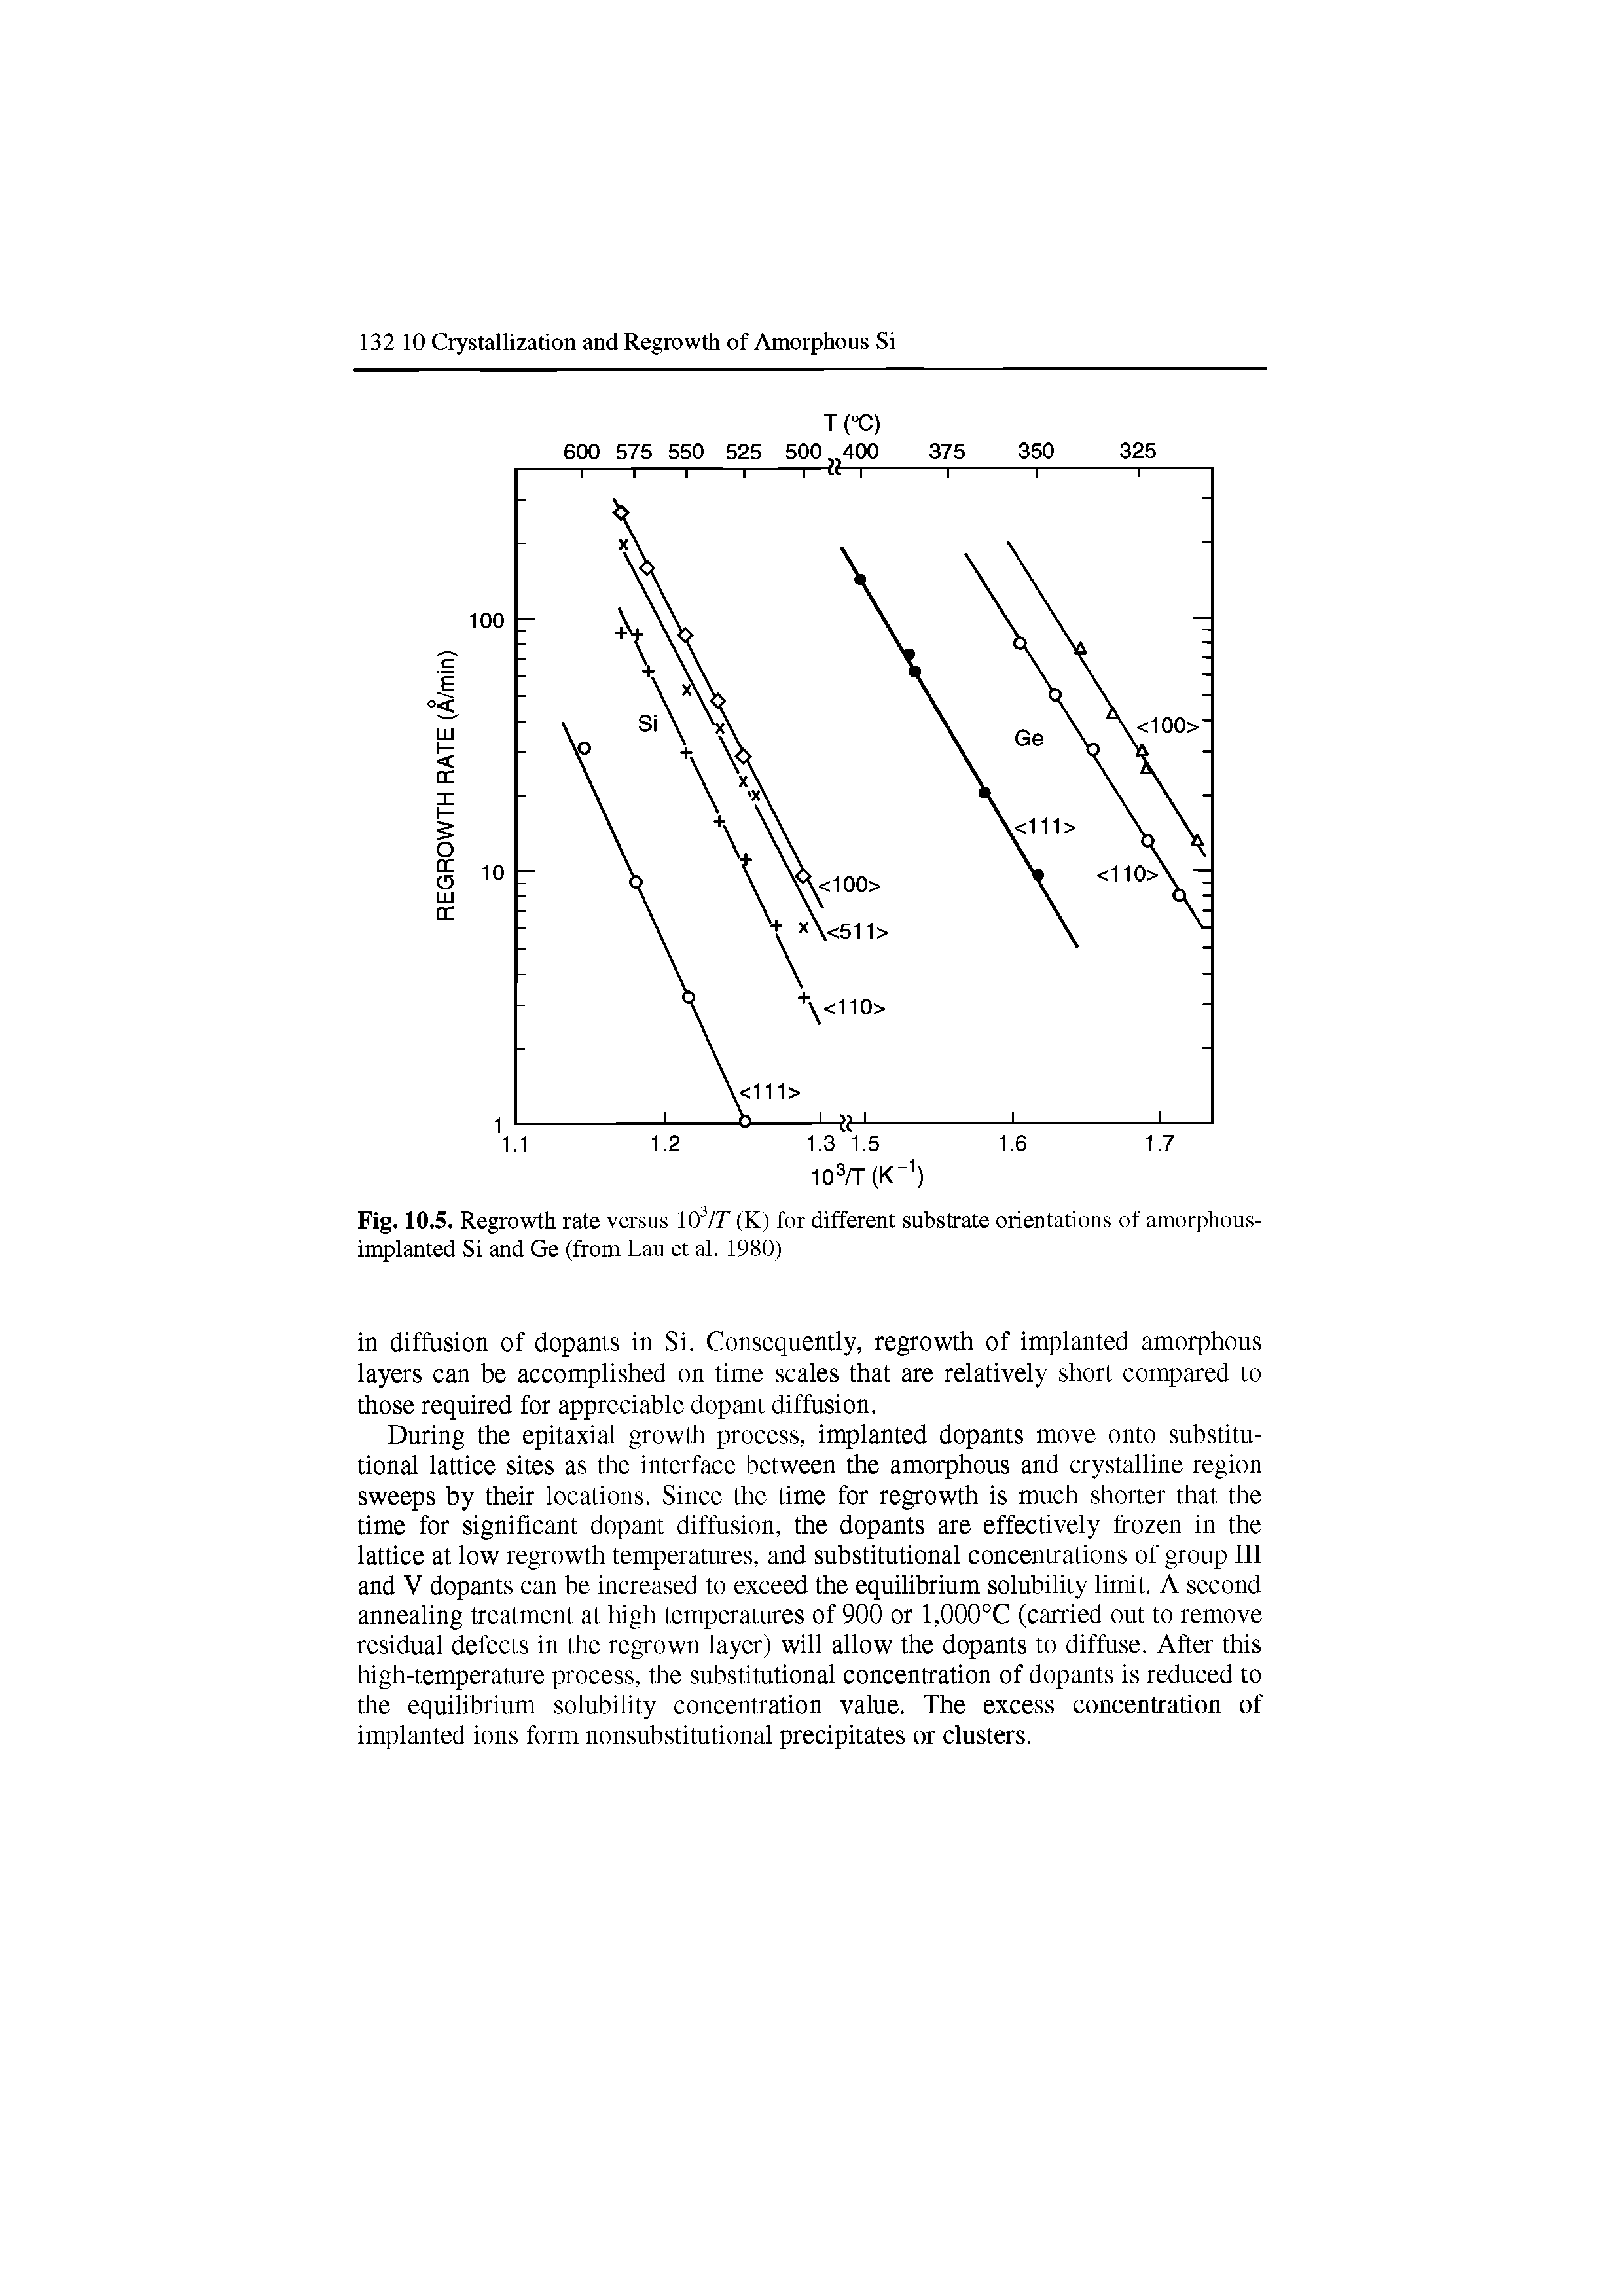 Fig. 10.5. Regrowth rate versus 103/r (K) for different substrate orientations of amorphous-implanted Si and Ge (from Lau et al. 1980)...